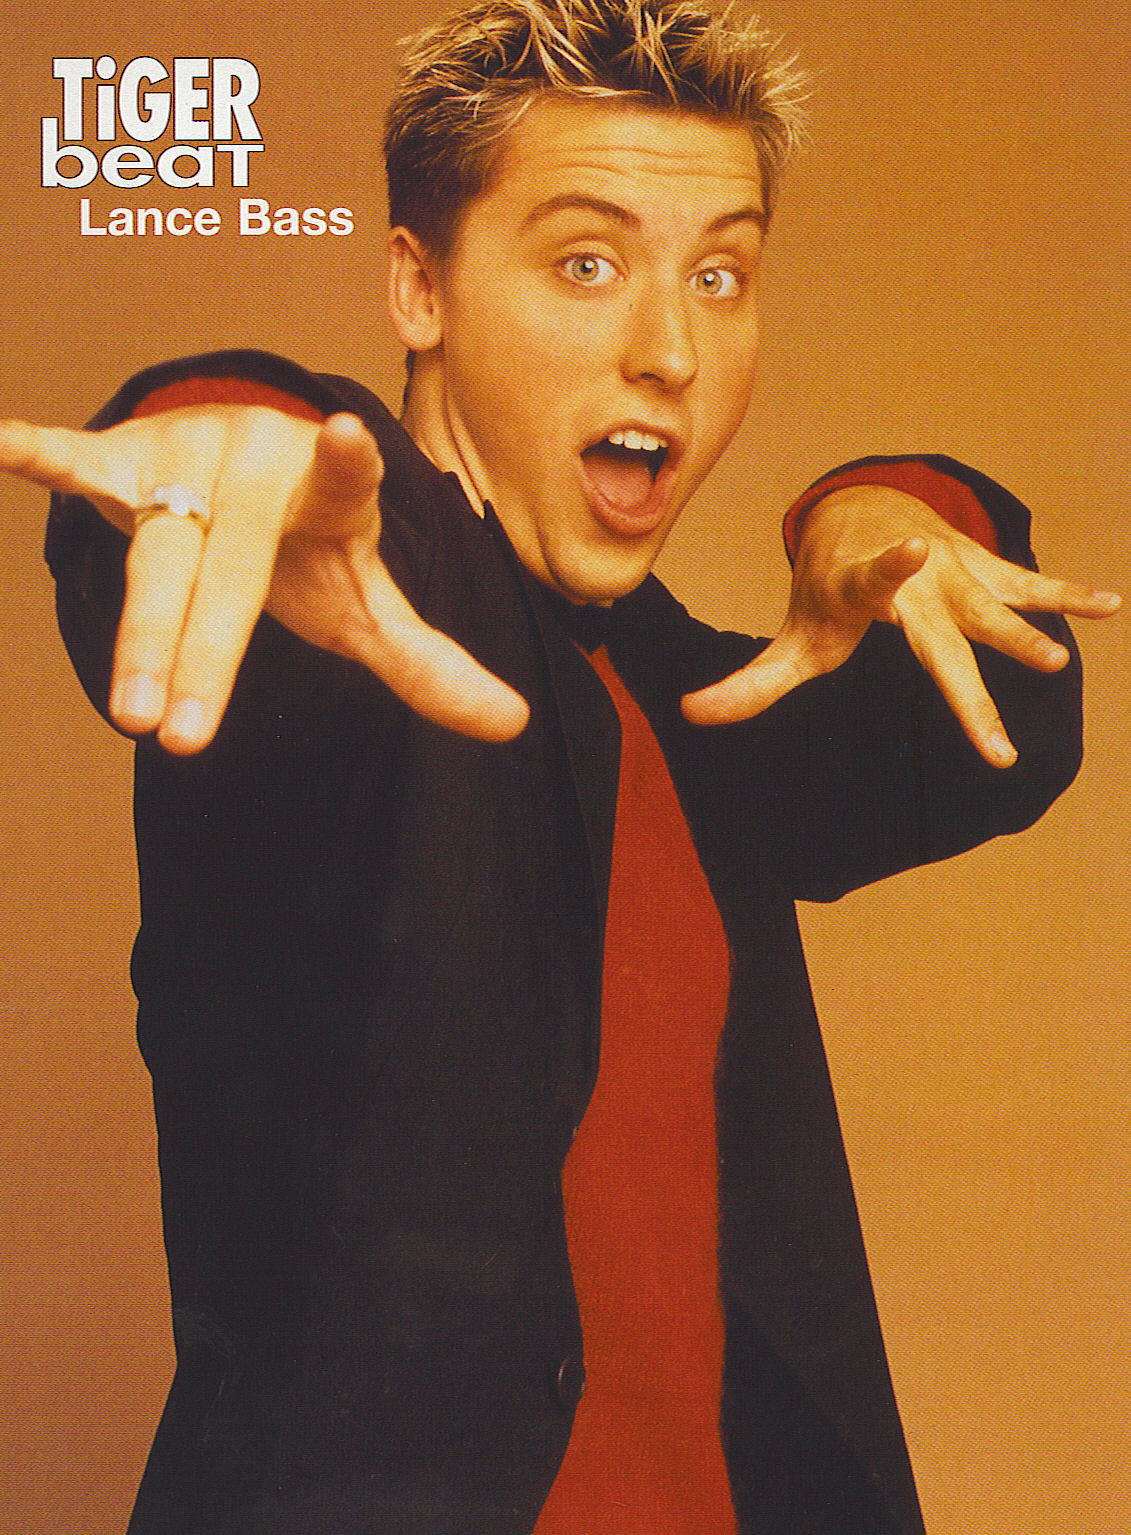 Picture Of Lance Bass In General Pictures Lancebass1301939773 Teen Idols 4 You